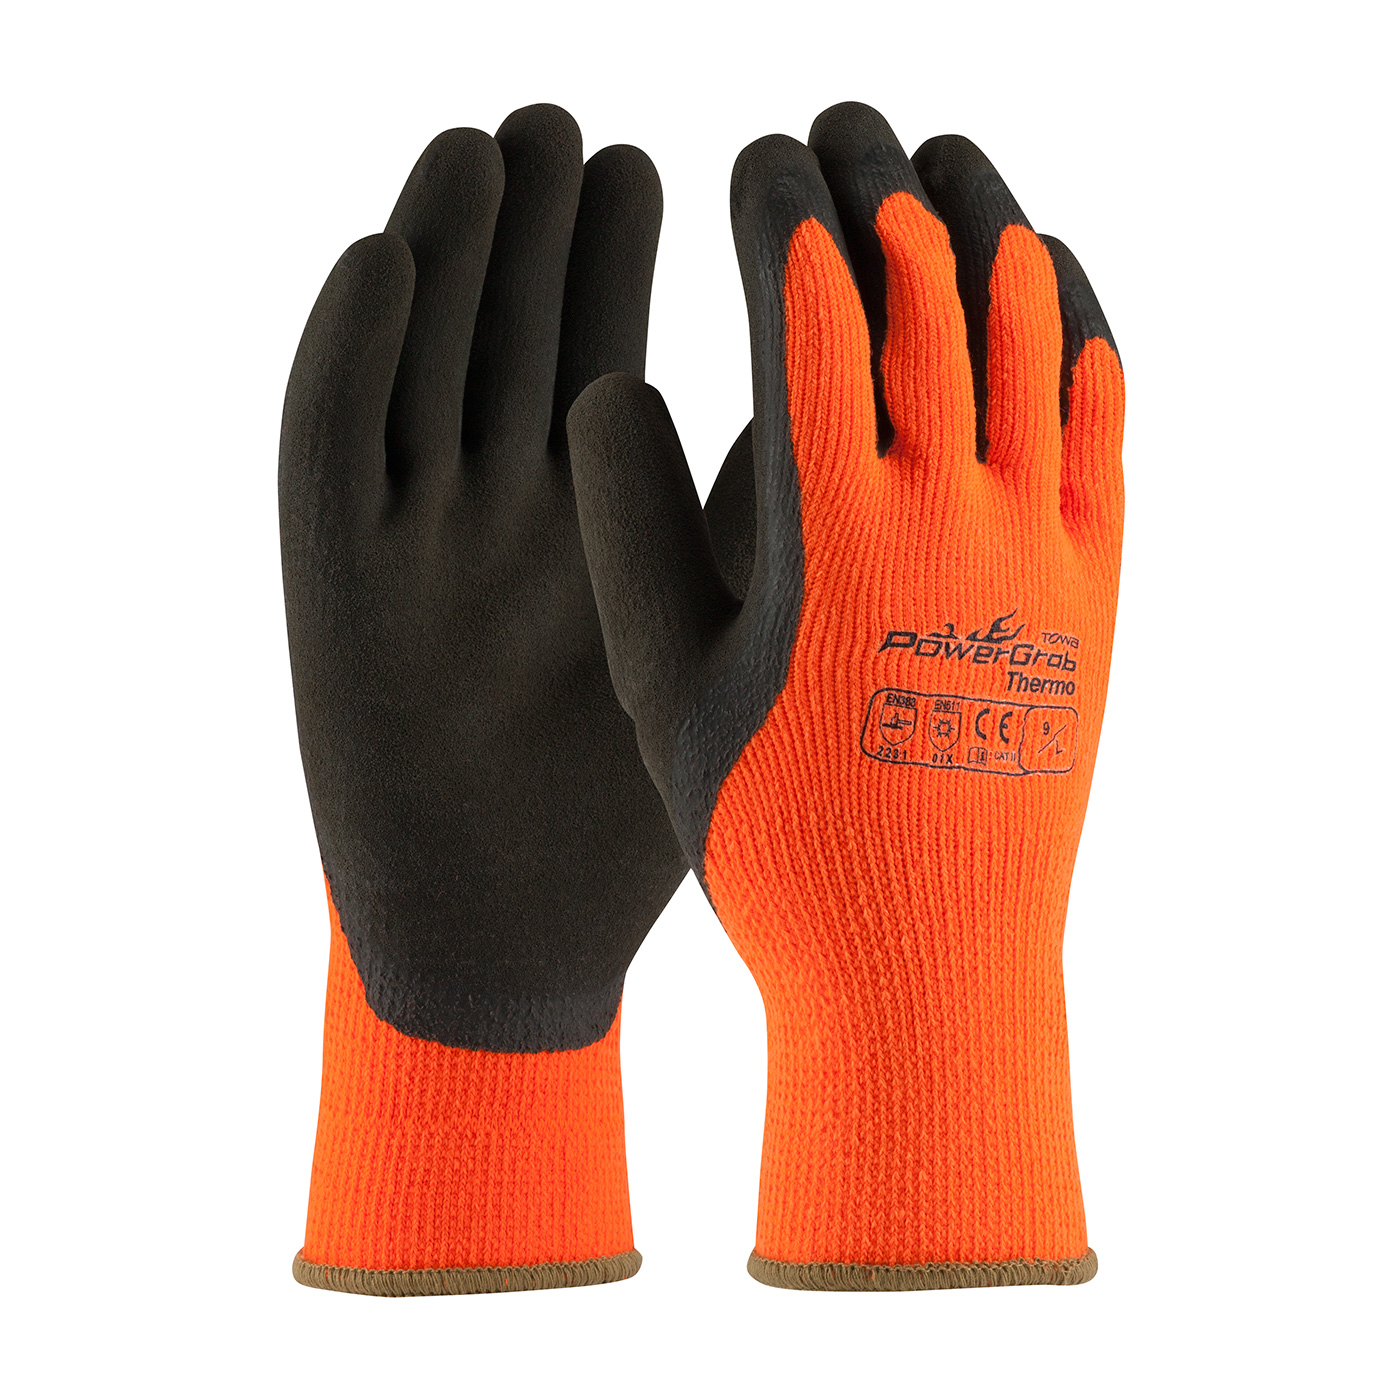 PIP 41-1400/L PowerGrab Thermo Hi-Vis Seamless Knit Acrylic Terry Glove with Latex MicroFinish Grip on Palm & Fingers - Large PID-41 1400 L